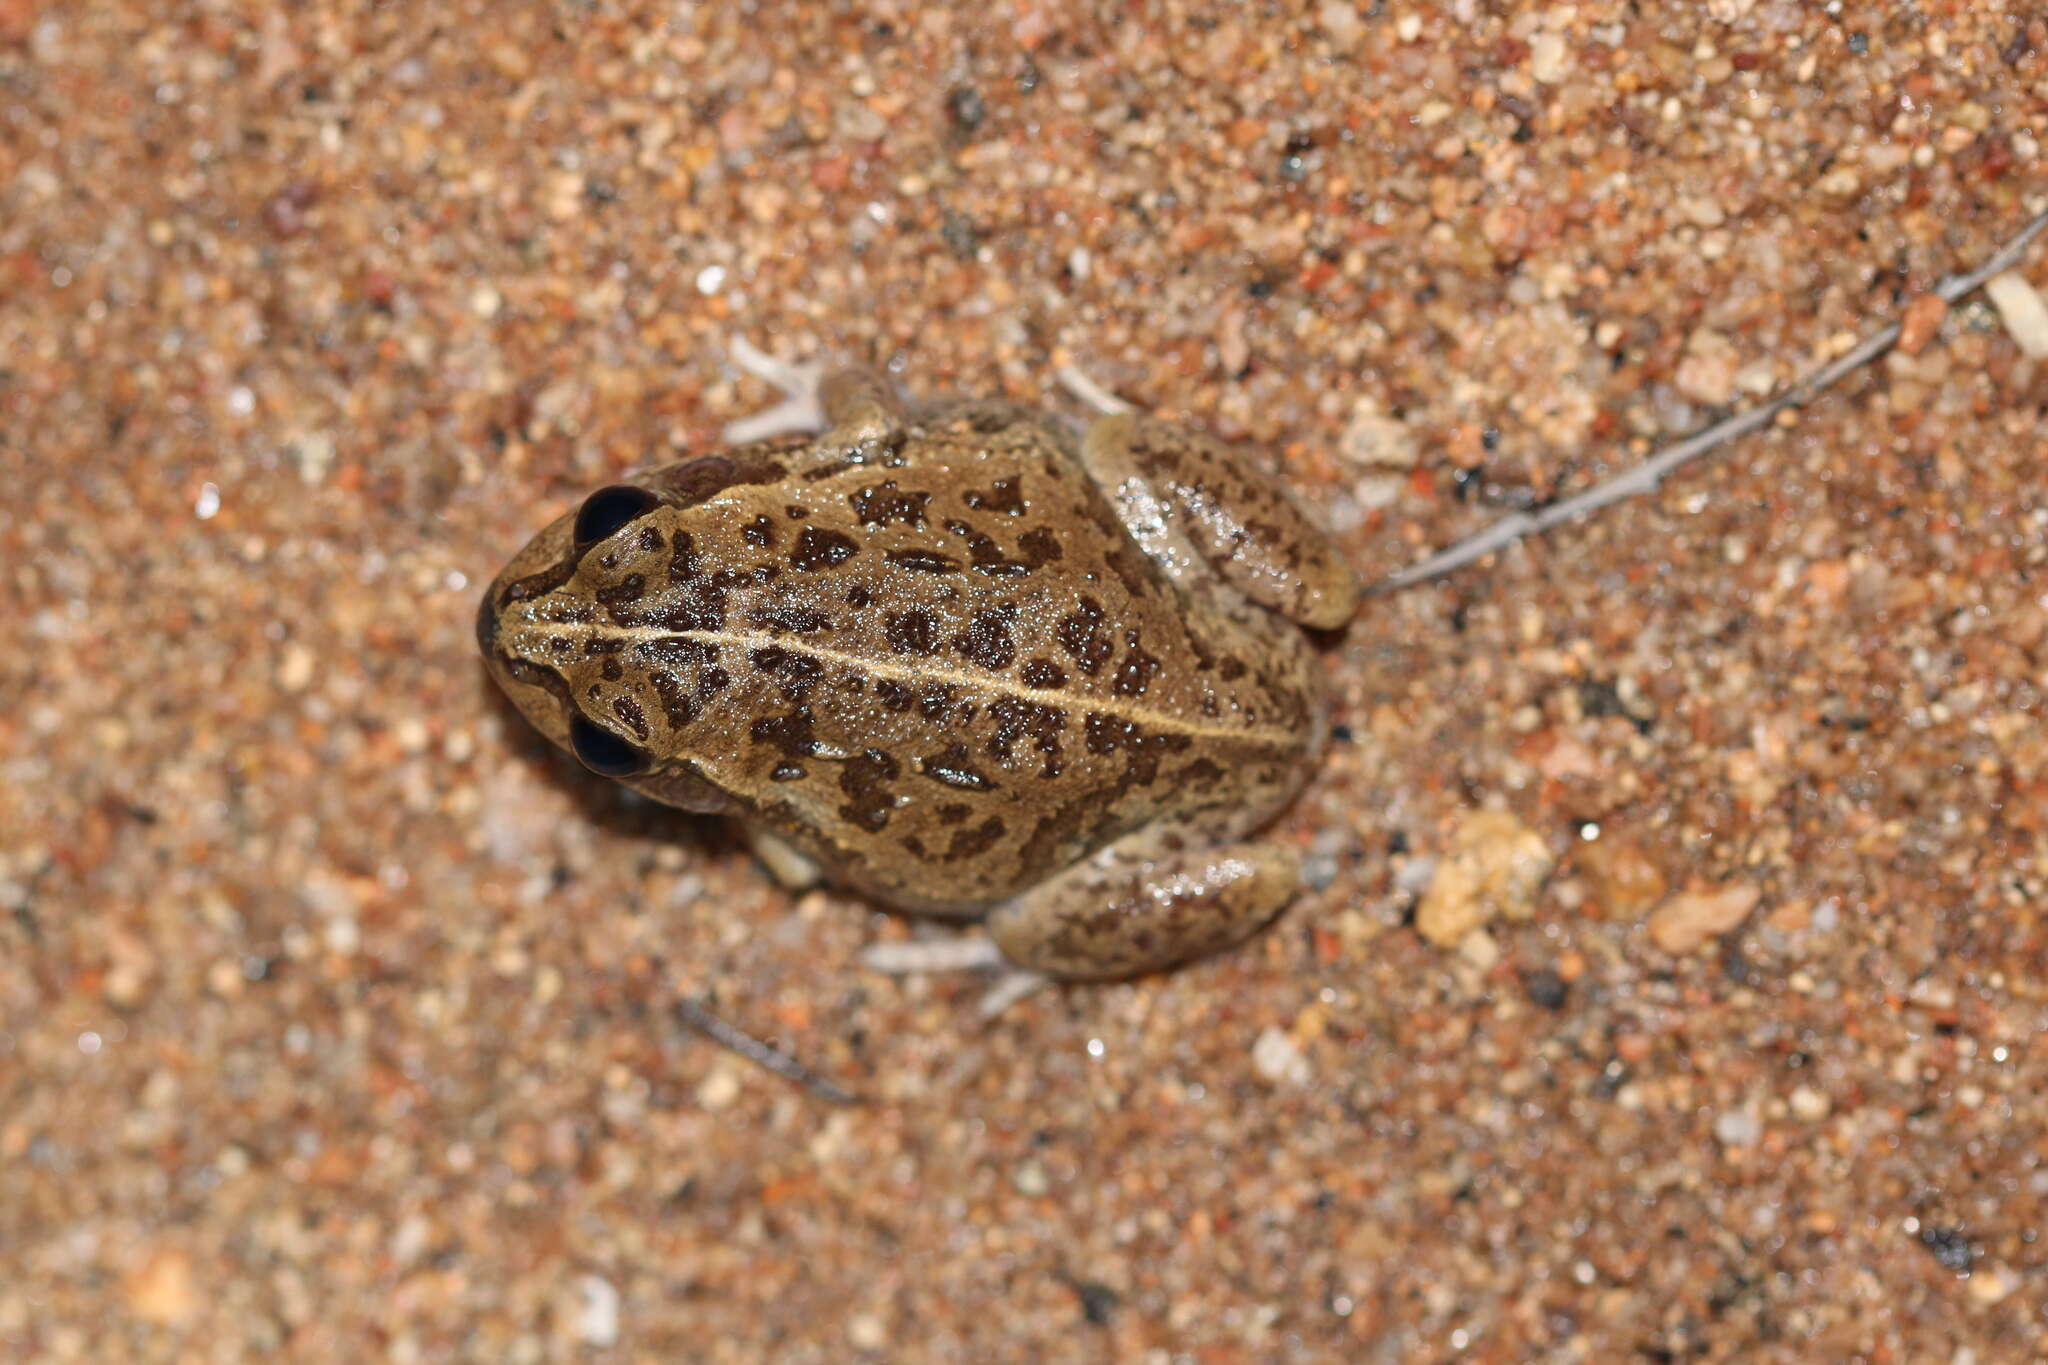 Image of Main's Frog